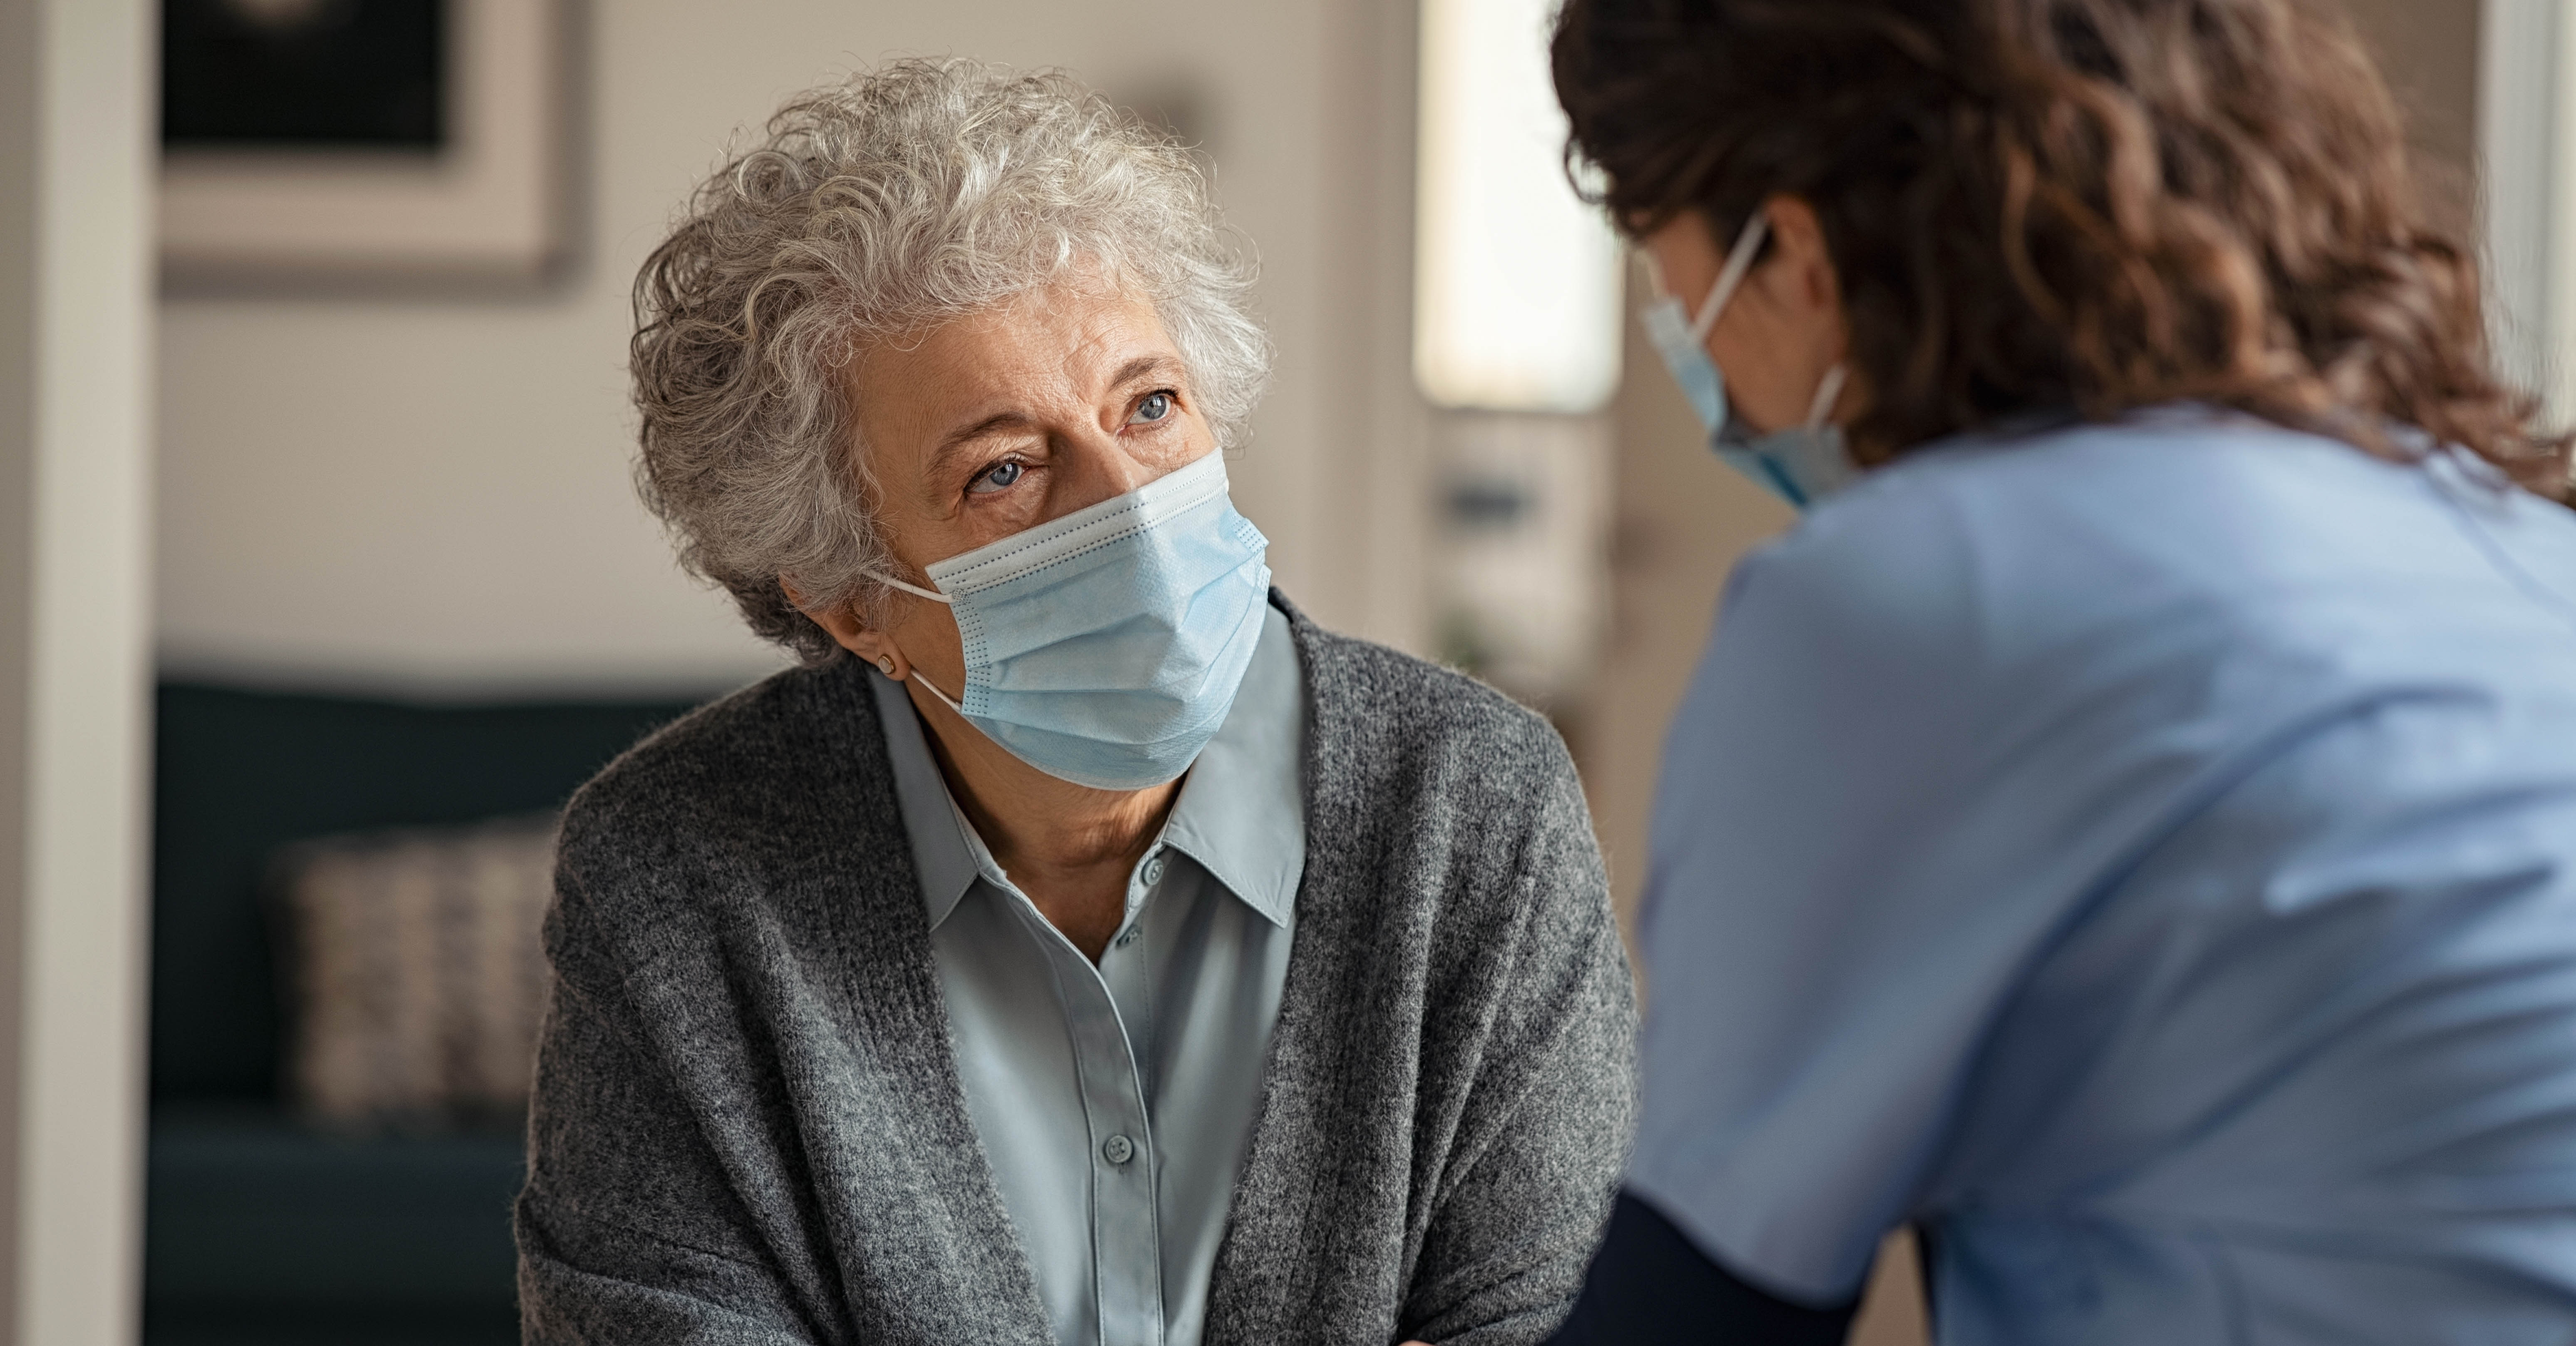 An elderly woman wearing a surgical mask speaks to a nurse.